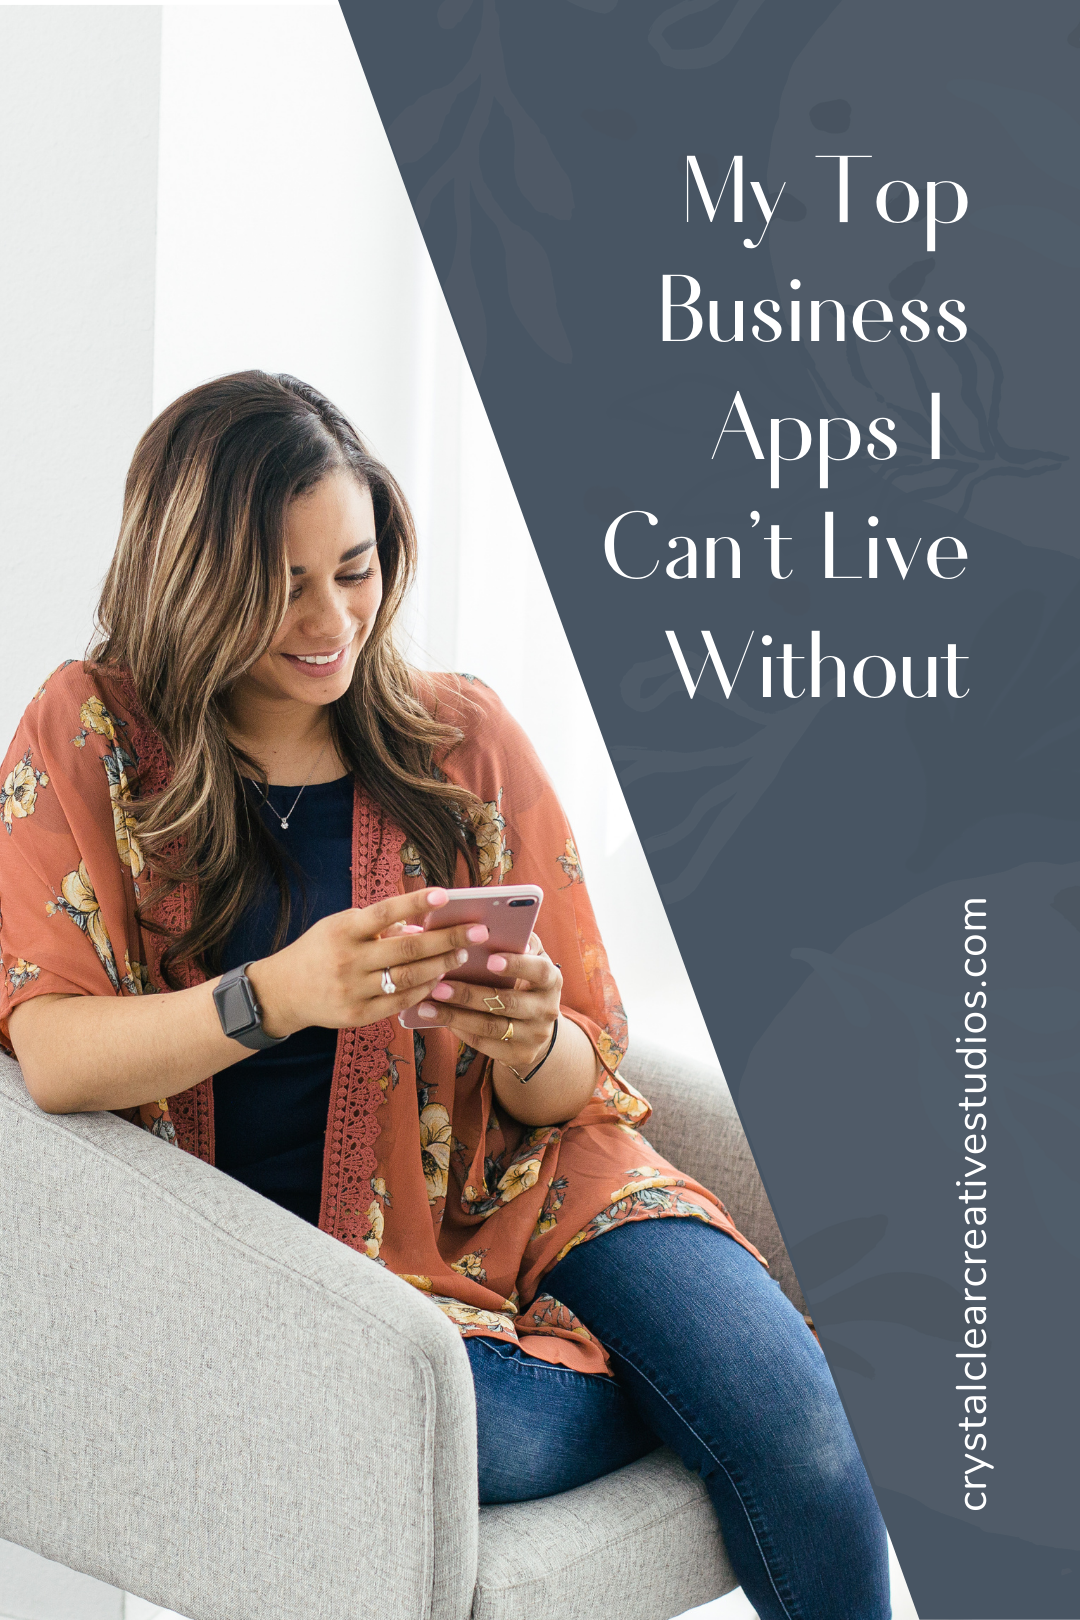 My Top Business Apps I Can't Live Without